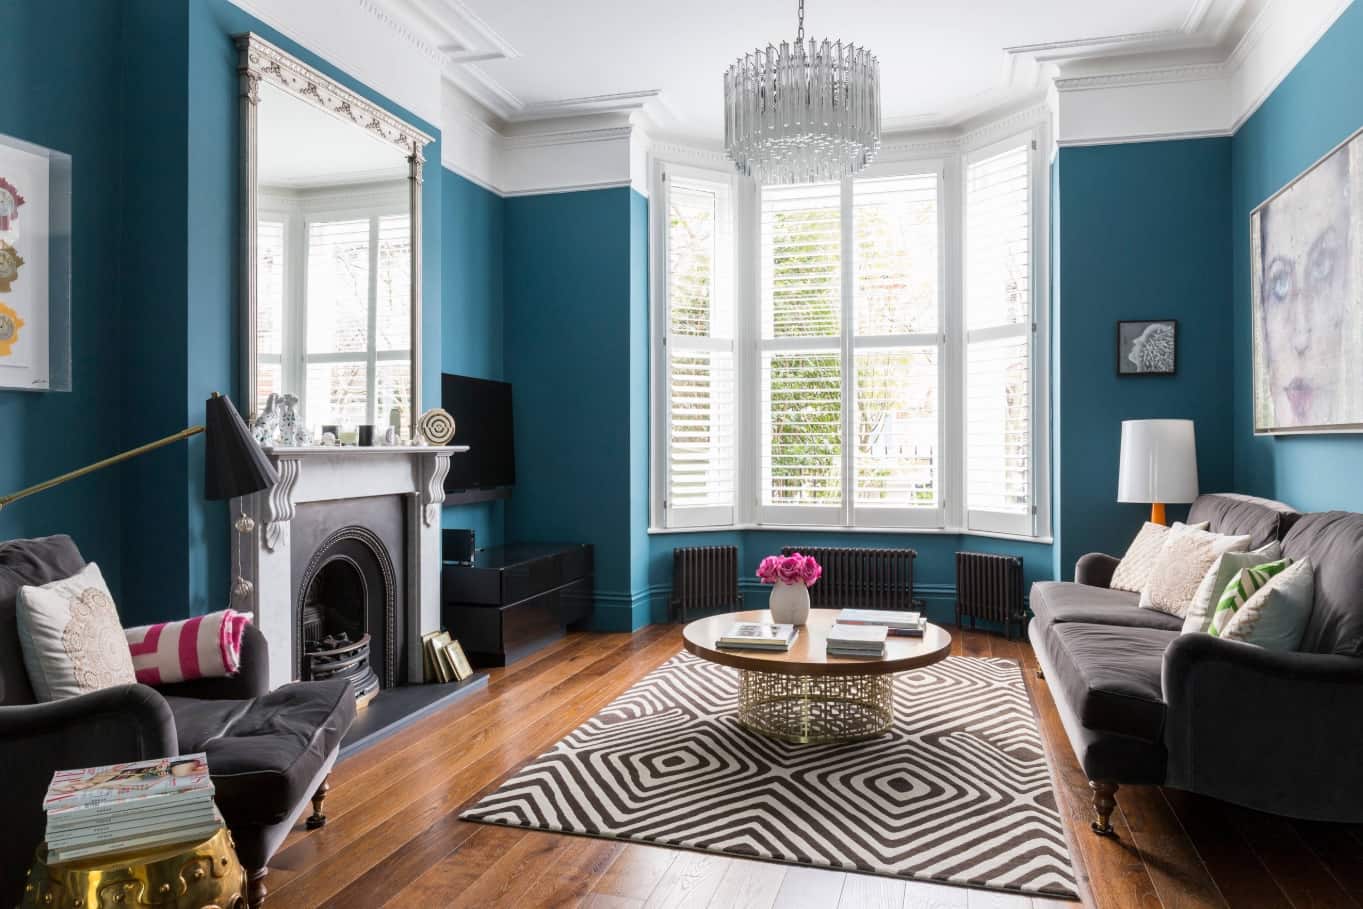 Bay window and blue wall paint for vintage styled living room